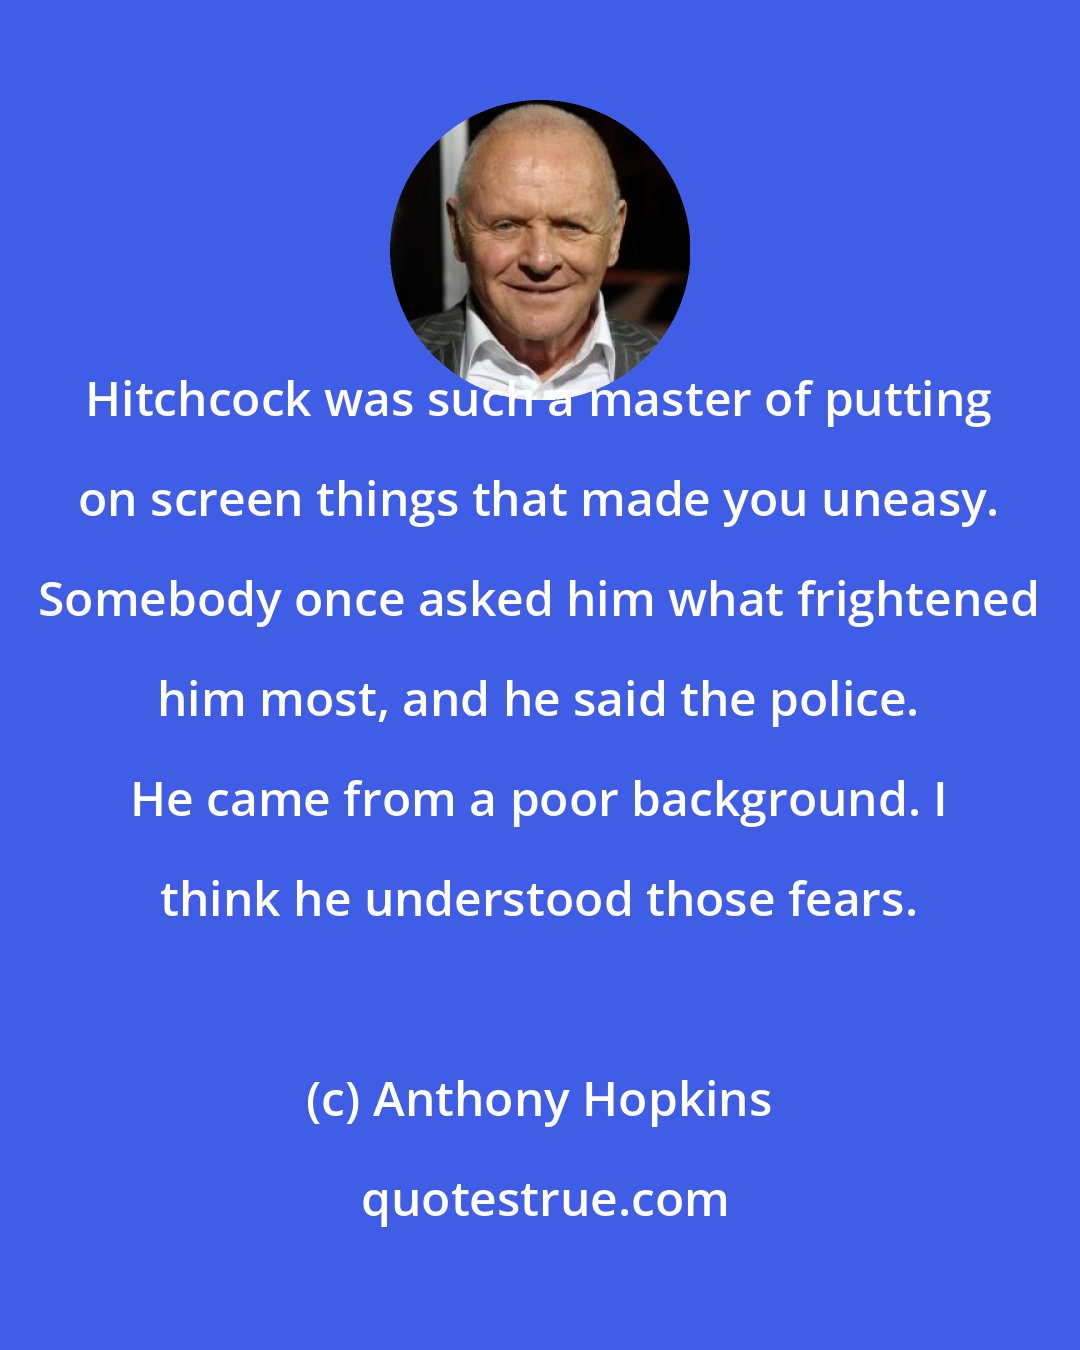 Anthony Hopkins: Hitchcock was such a master of putting on screen things that made you uneasy. Somebody once asked him what frightened him most, and he said the police. He came from a poor background. I think he understood those fears.